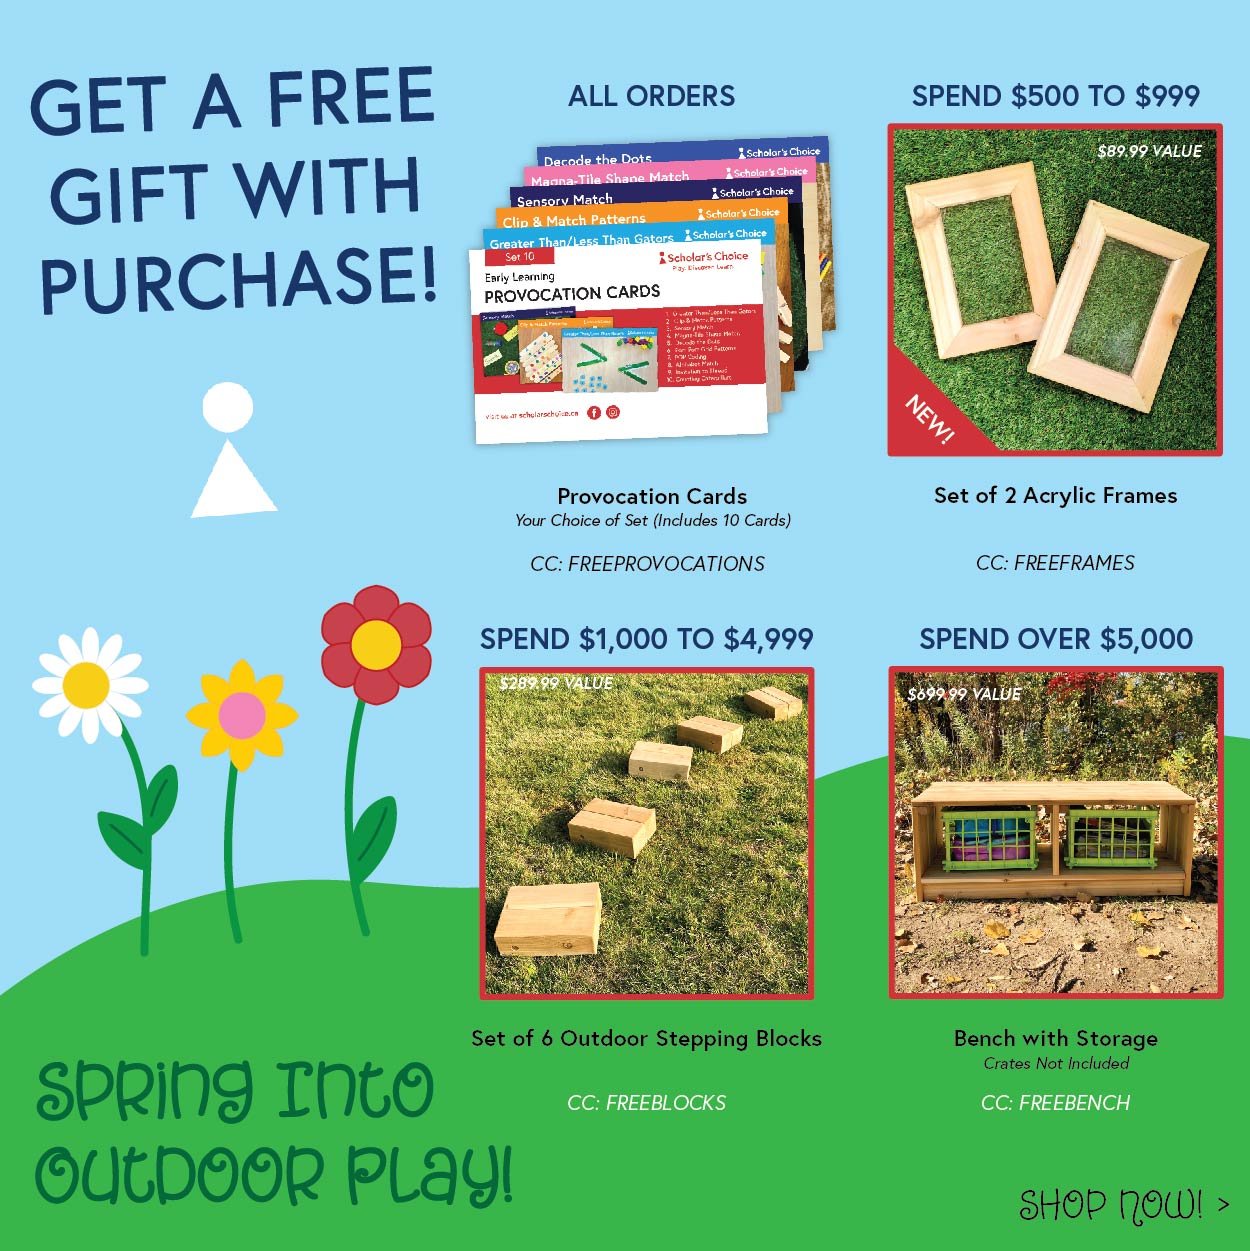 spring-into-outdoor-play-offer